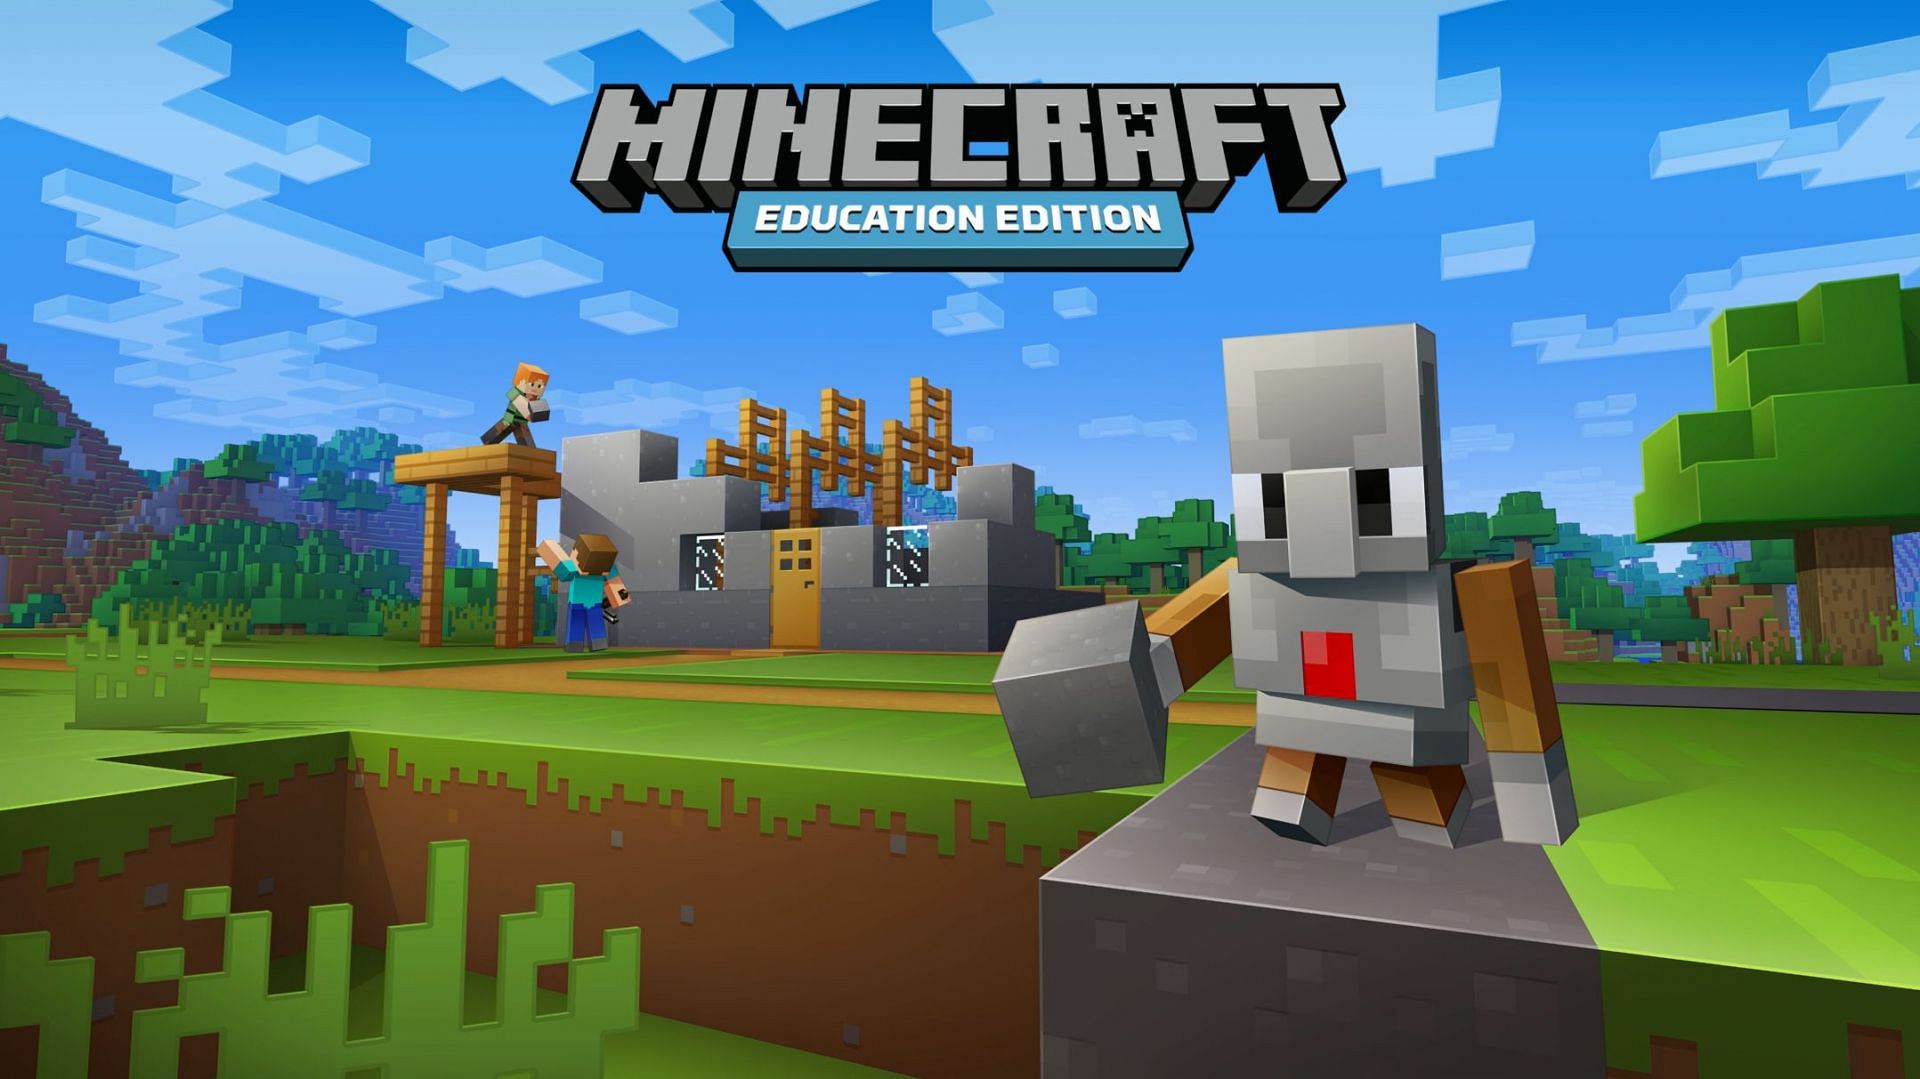 The Education Edition of Minecraft is highly popular for learning environments (Image via Education Edition)